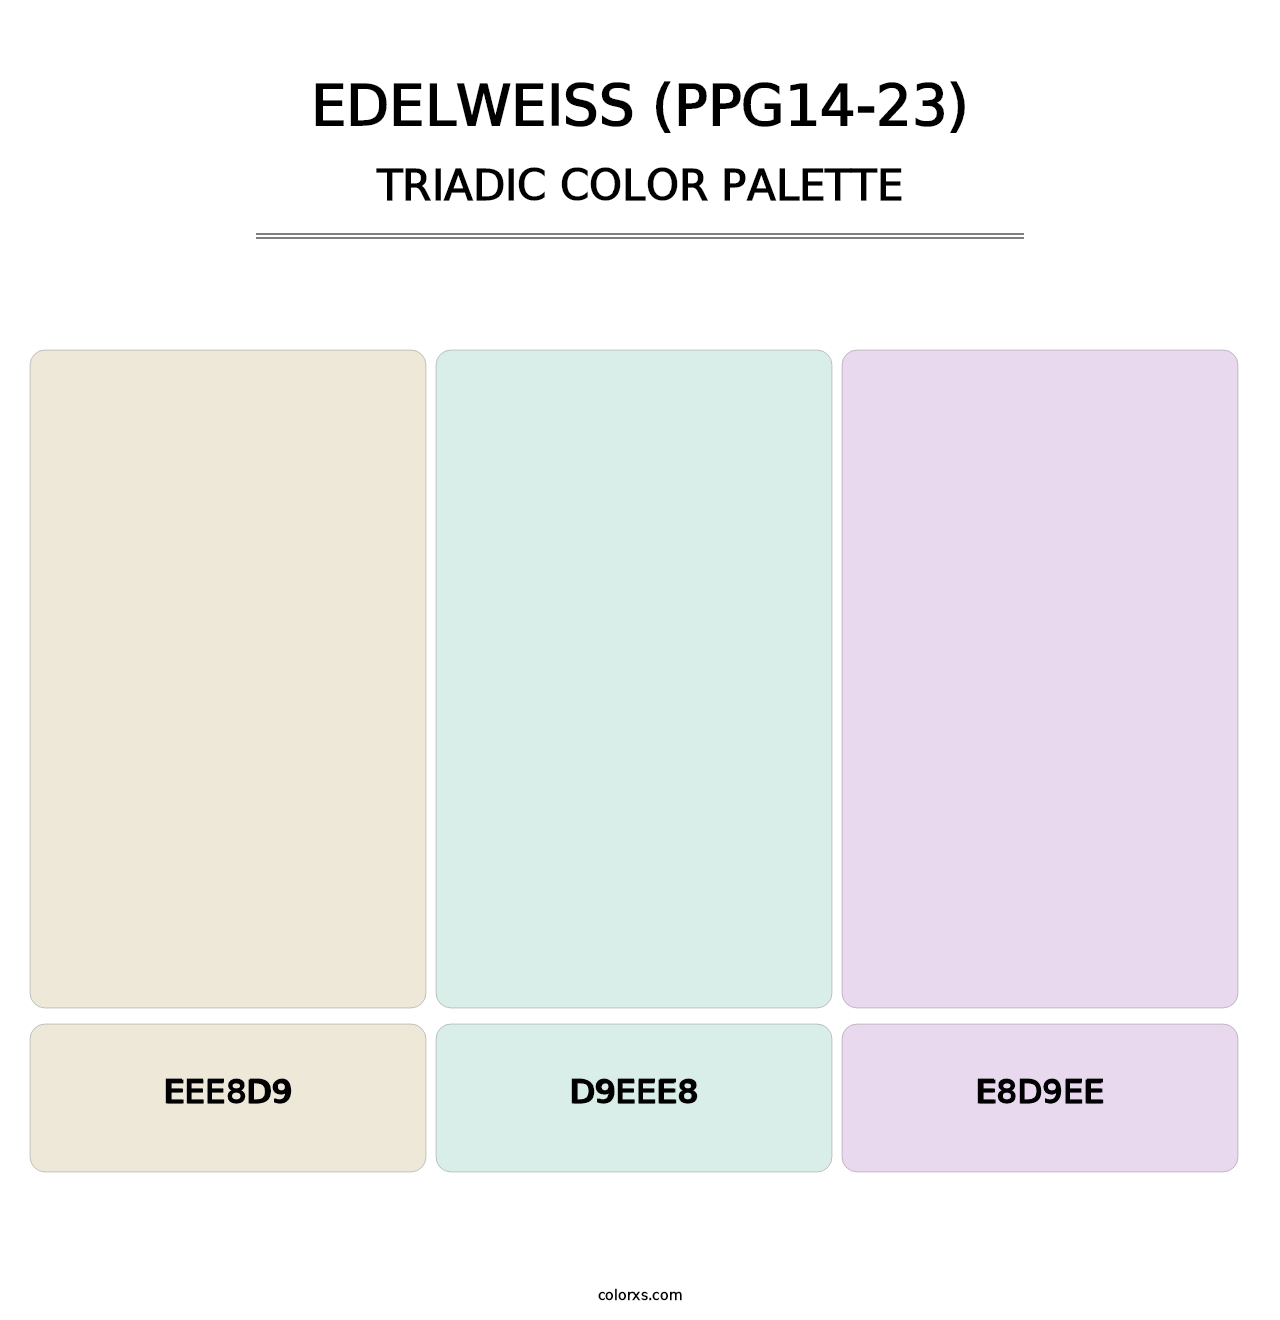 Edelweiss (PPG14-23) - Triadic Color Palette